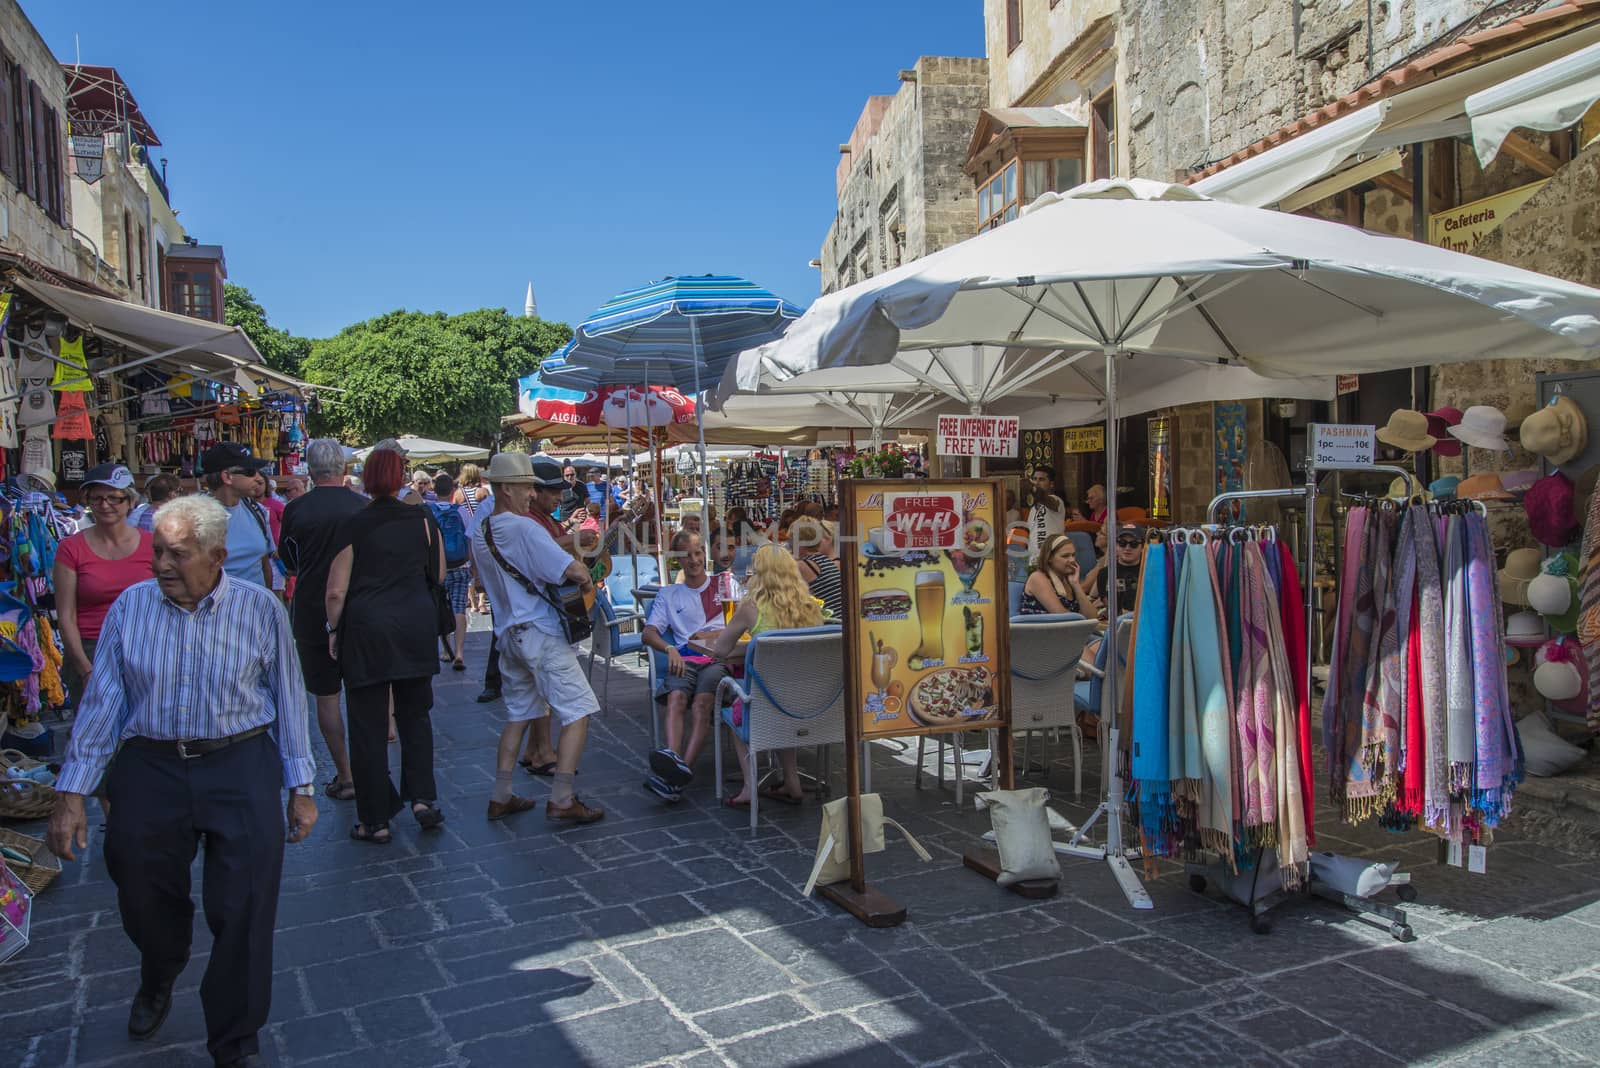 busy street in the old town of rhodes by steirus